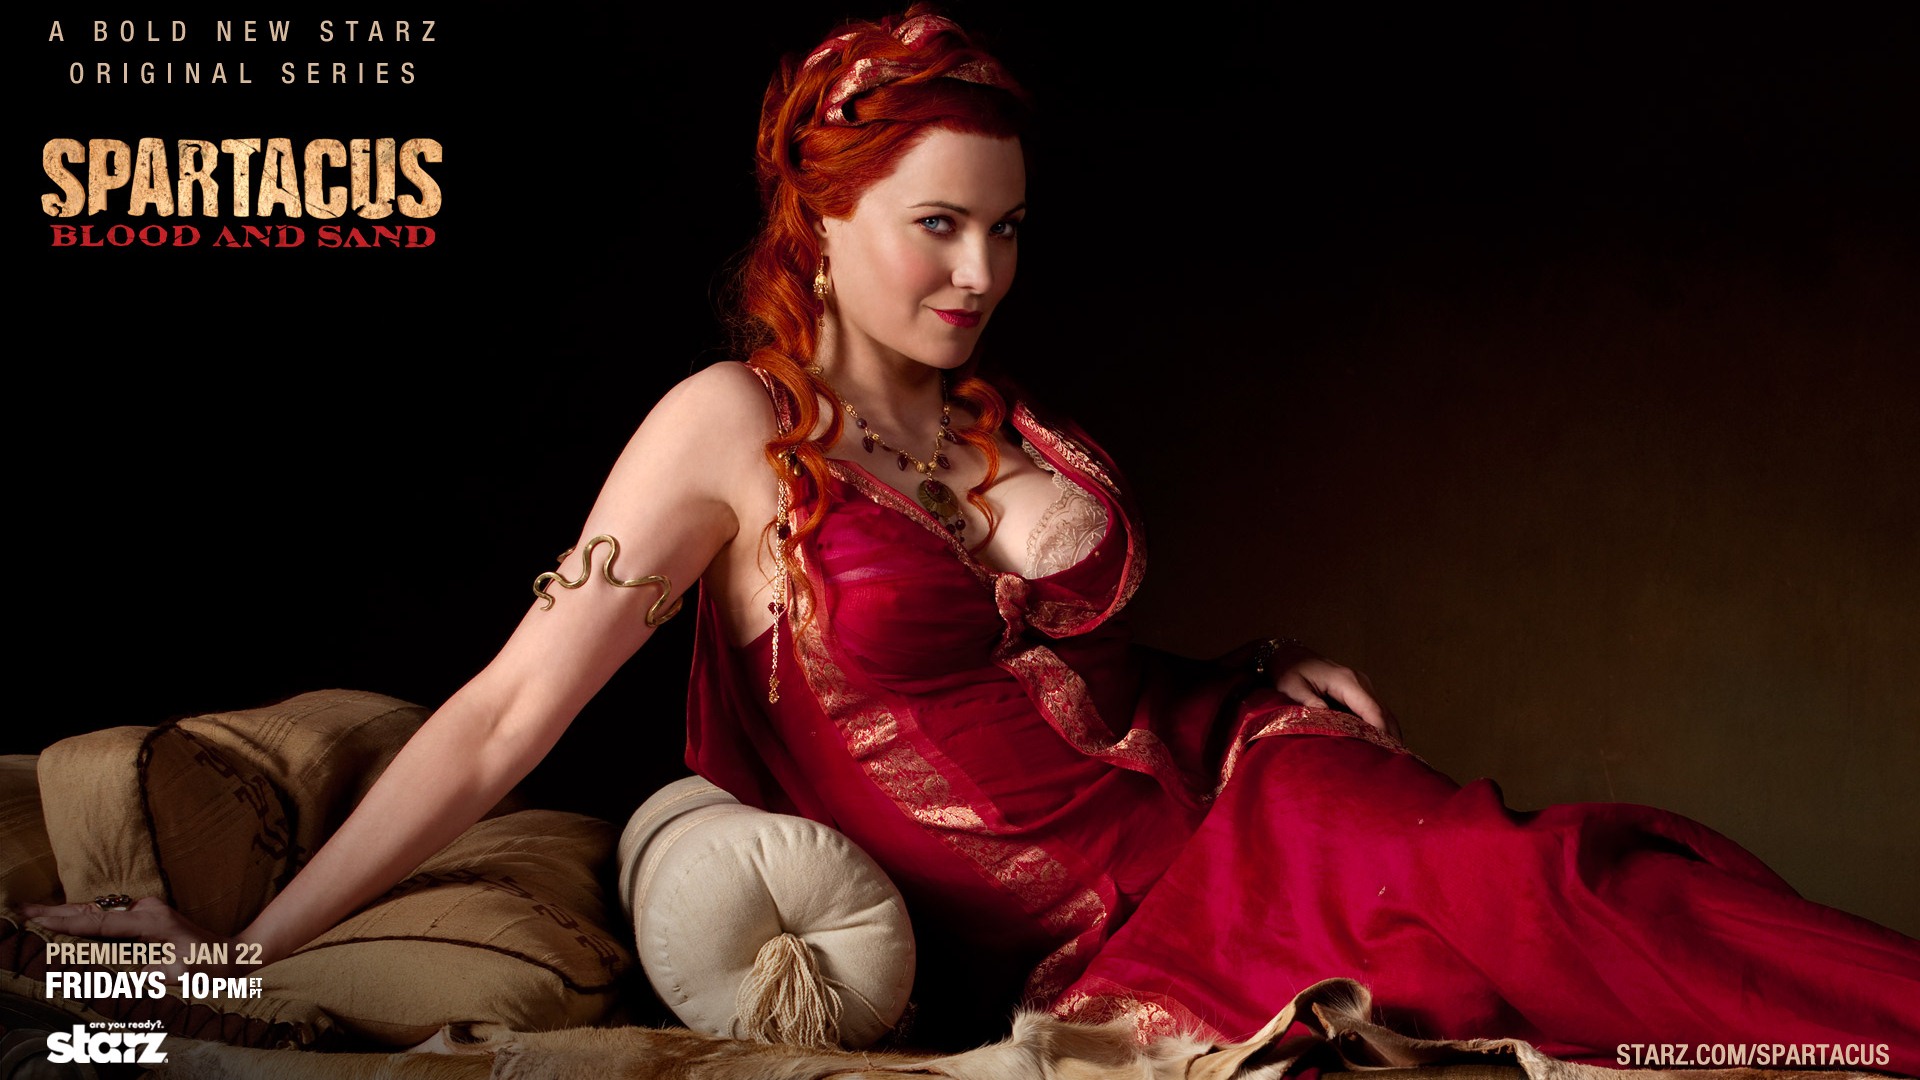 Spartacus: Blood and Sand HD Wallpaper #6 - 1920x1080